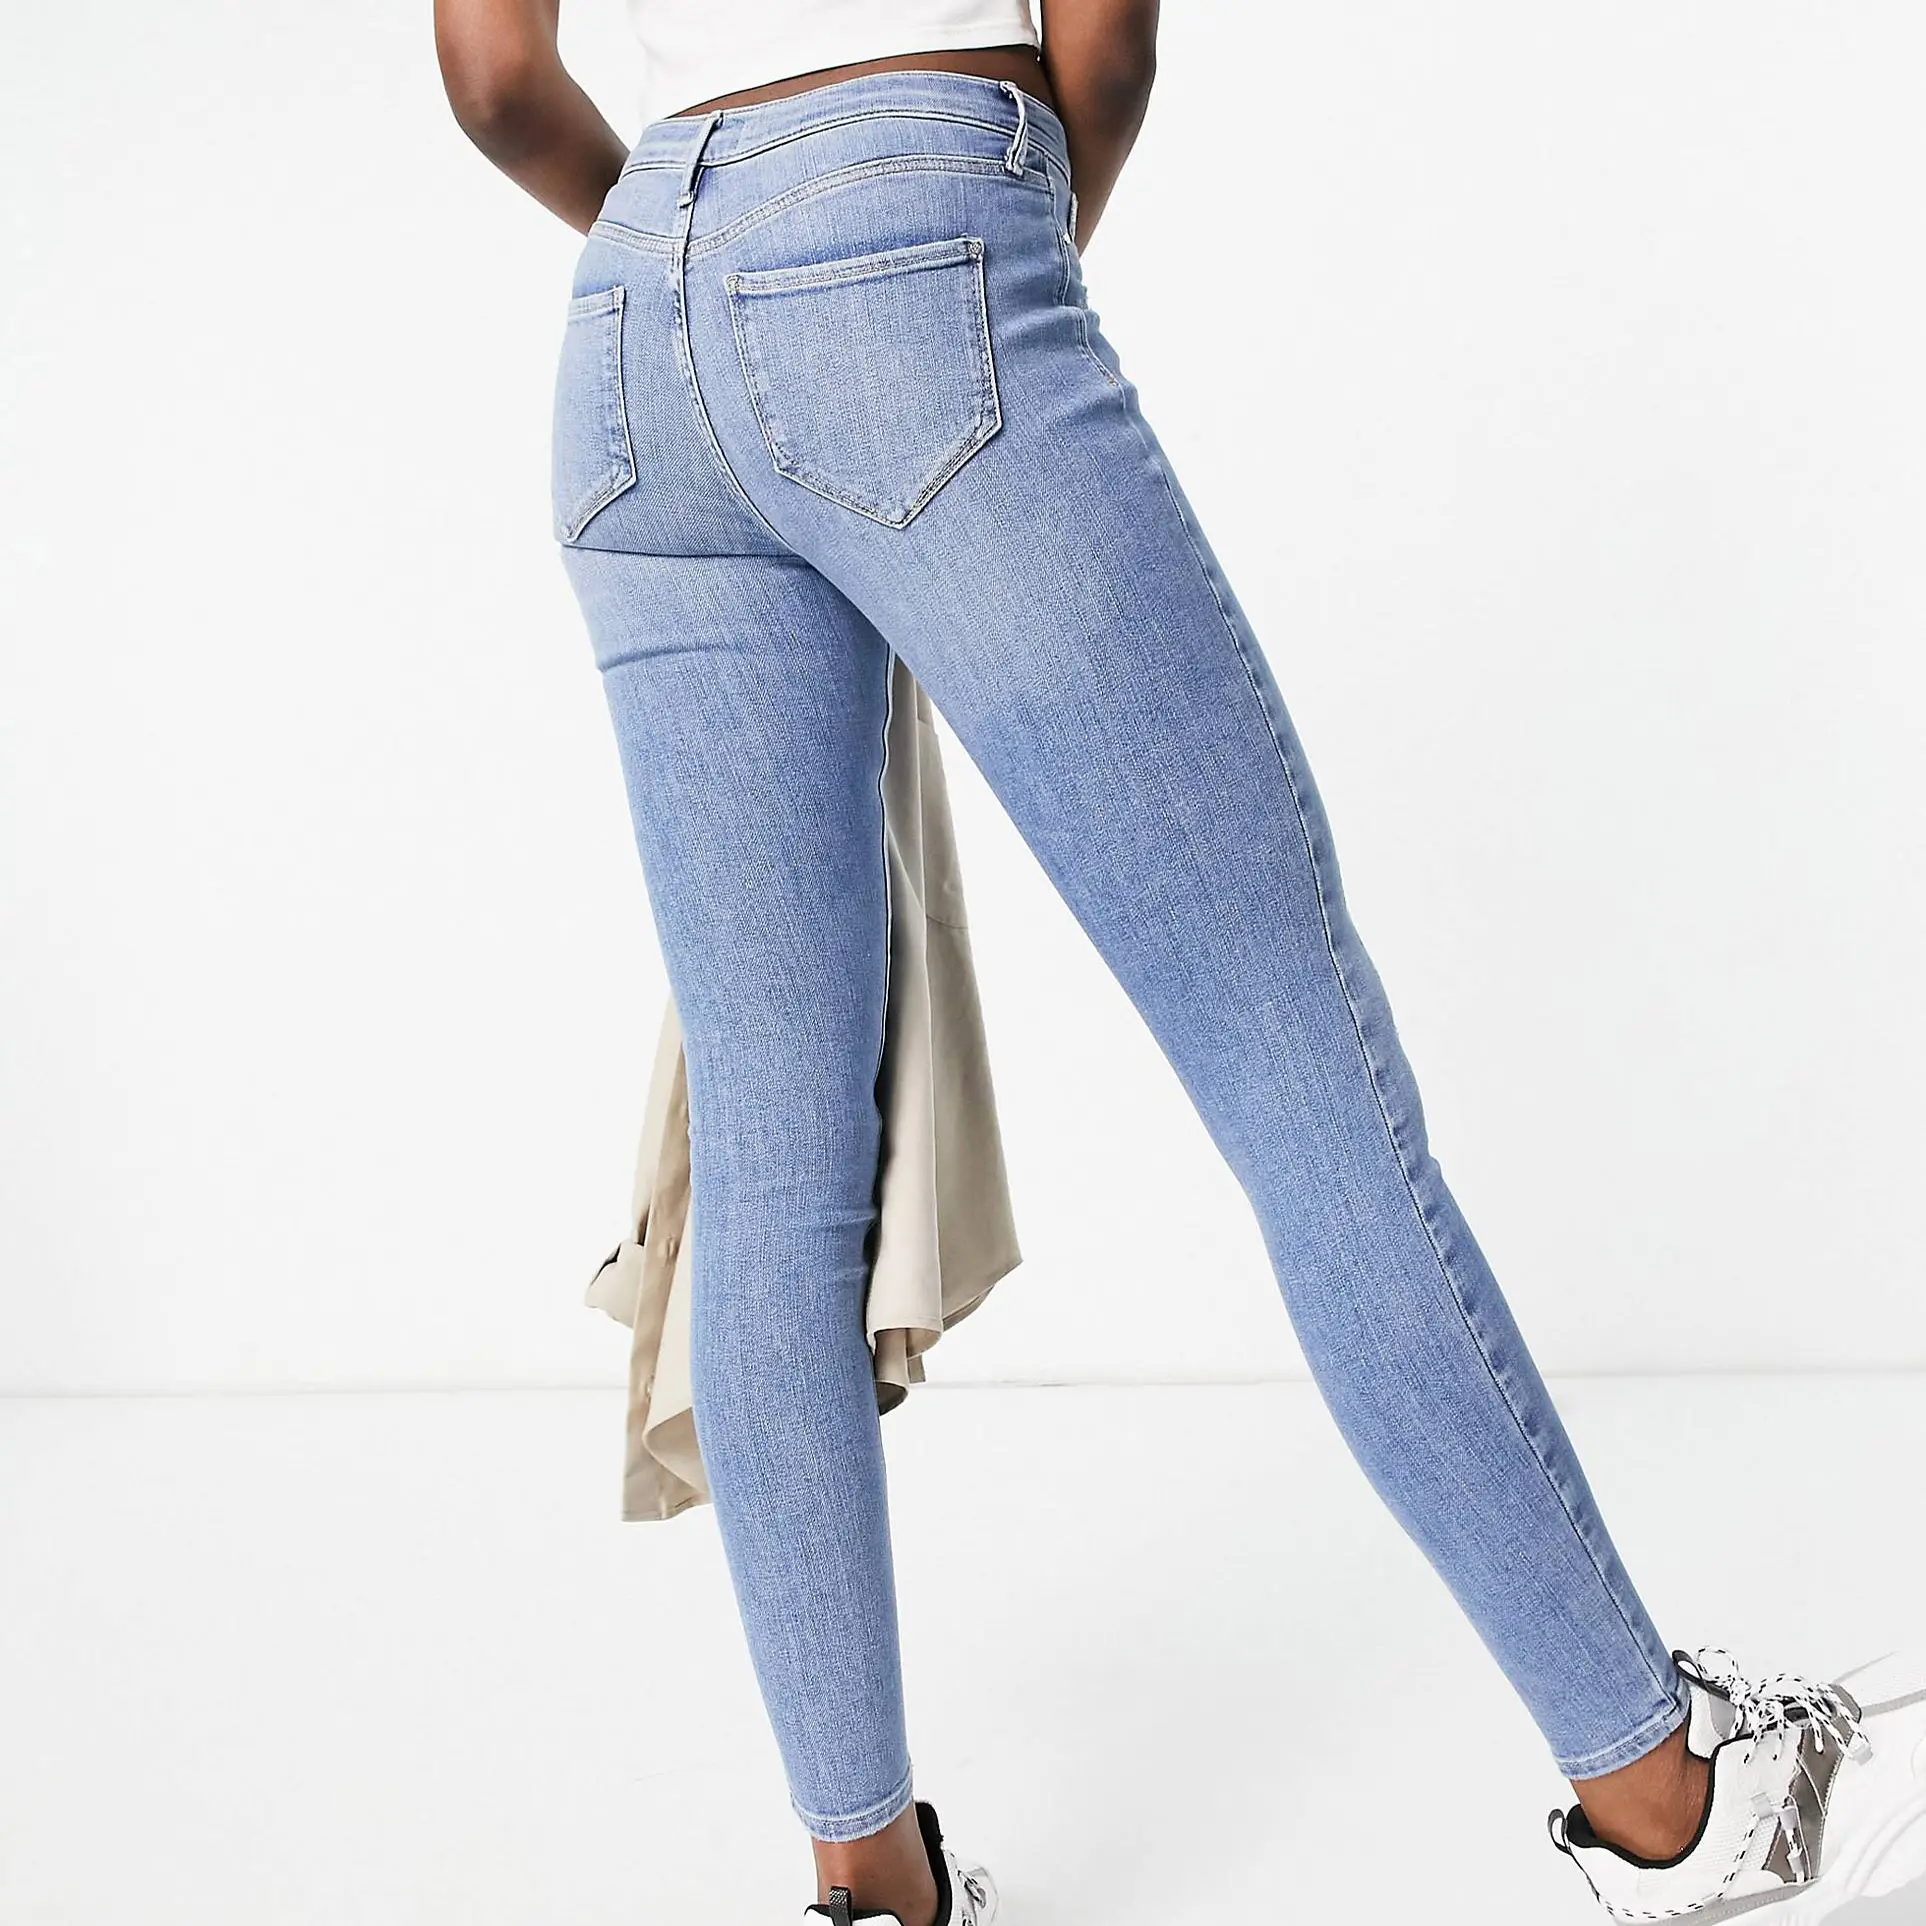 The Best Jeans For Tall Women | The Sole Supplier